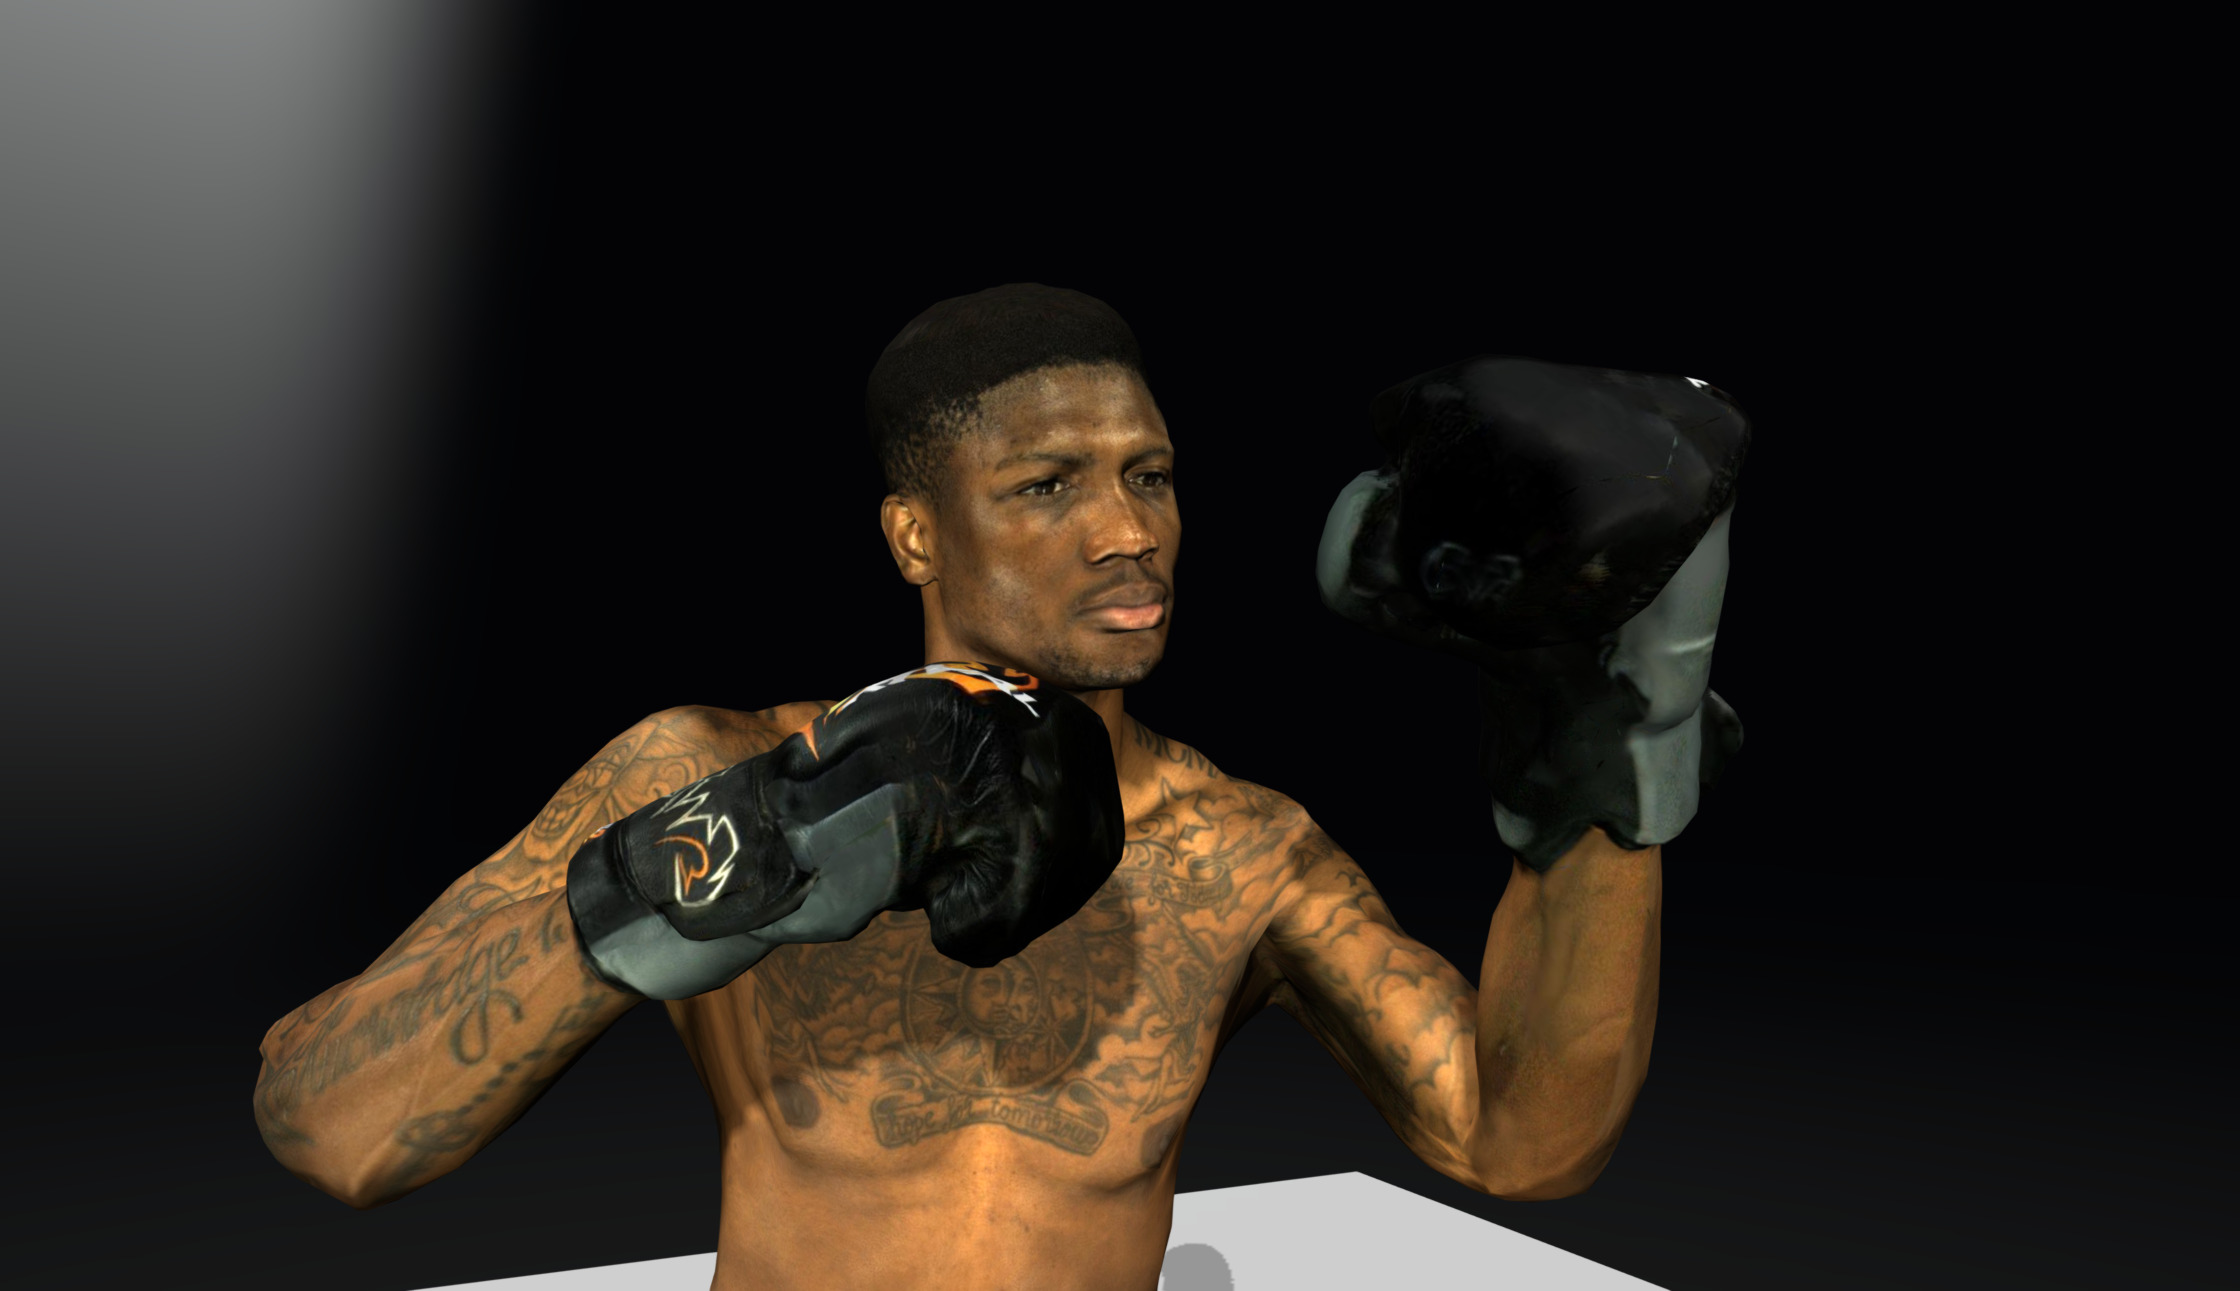 Mikael From Stonebridge Boxing, London.

https://repronauts.com

7 Action Looping  Animation. 

25K Poly mesh. 

4K Texture Map. 

Repronauts | Fast, accurate, mobile 3D scanning | Virtual Production 3d model